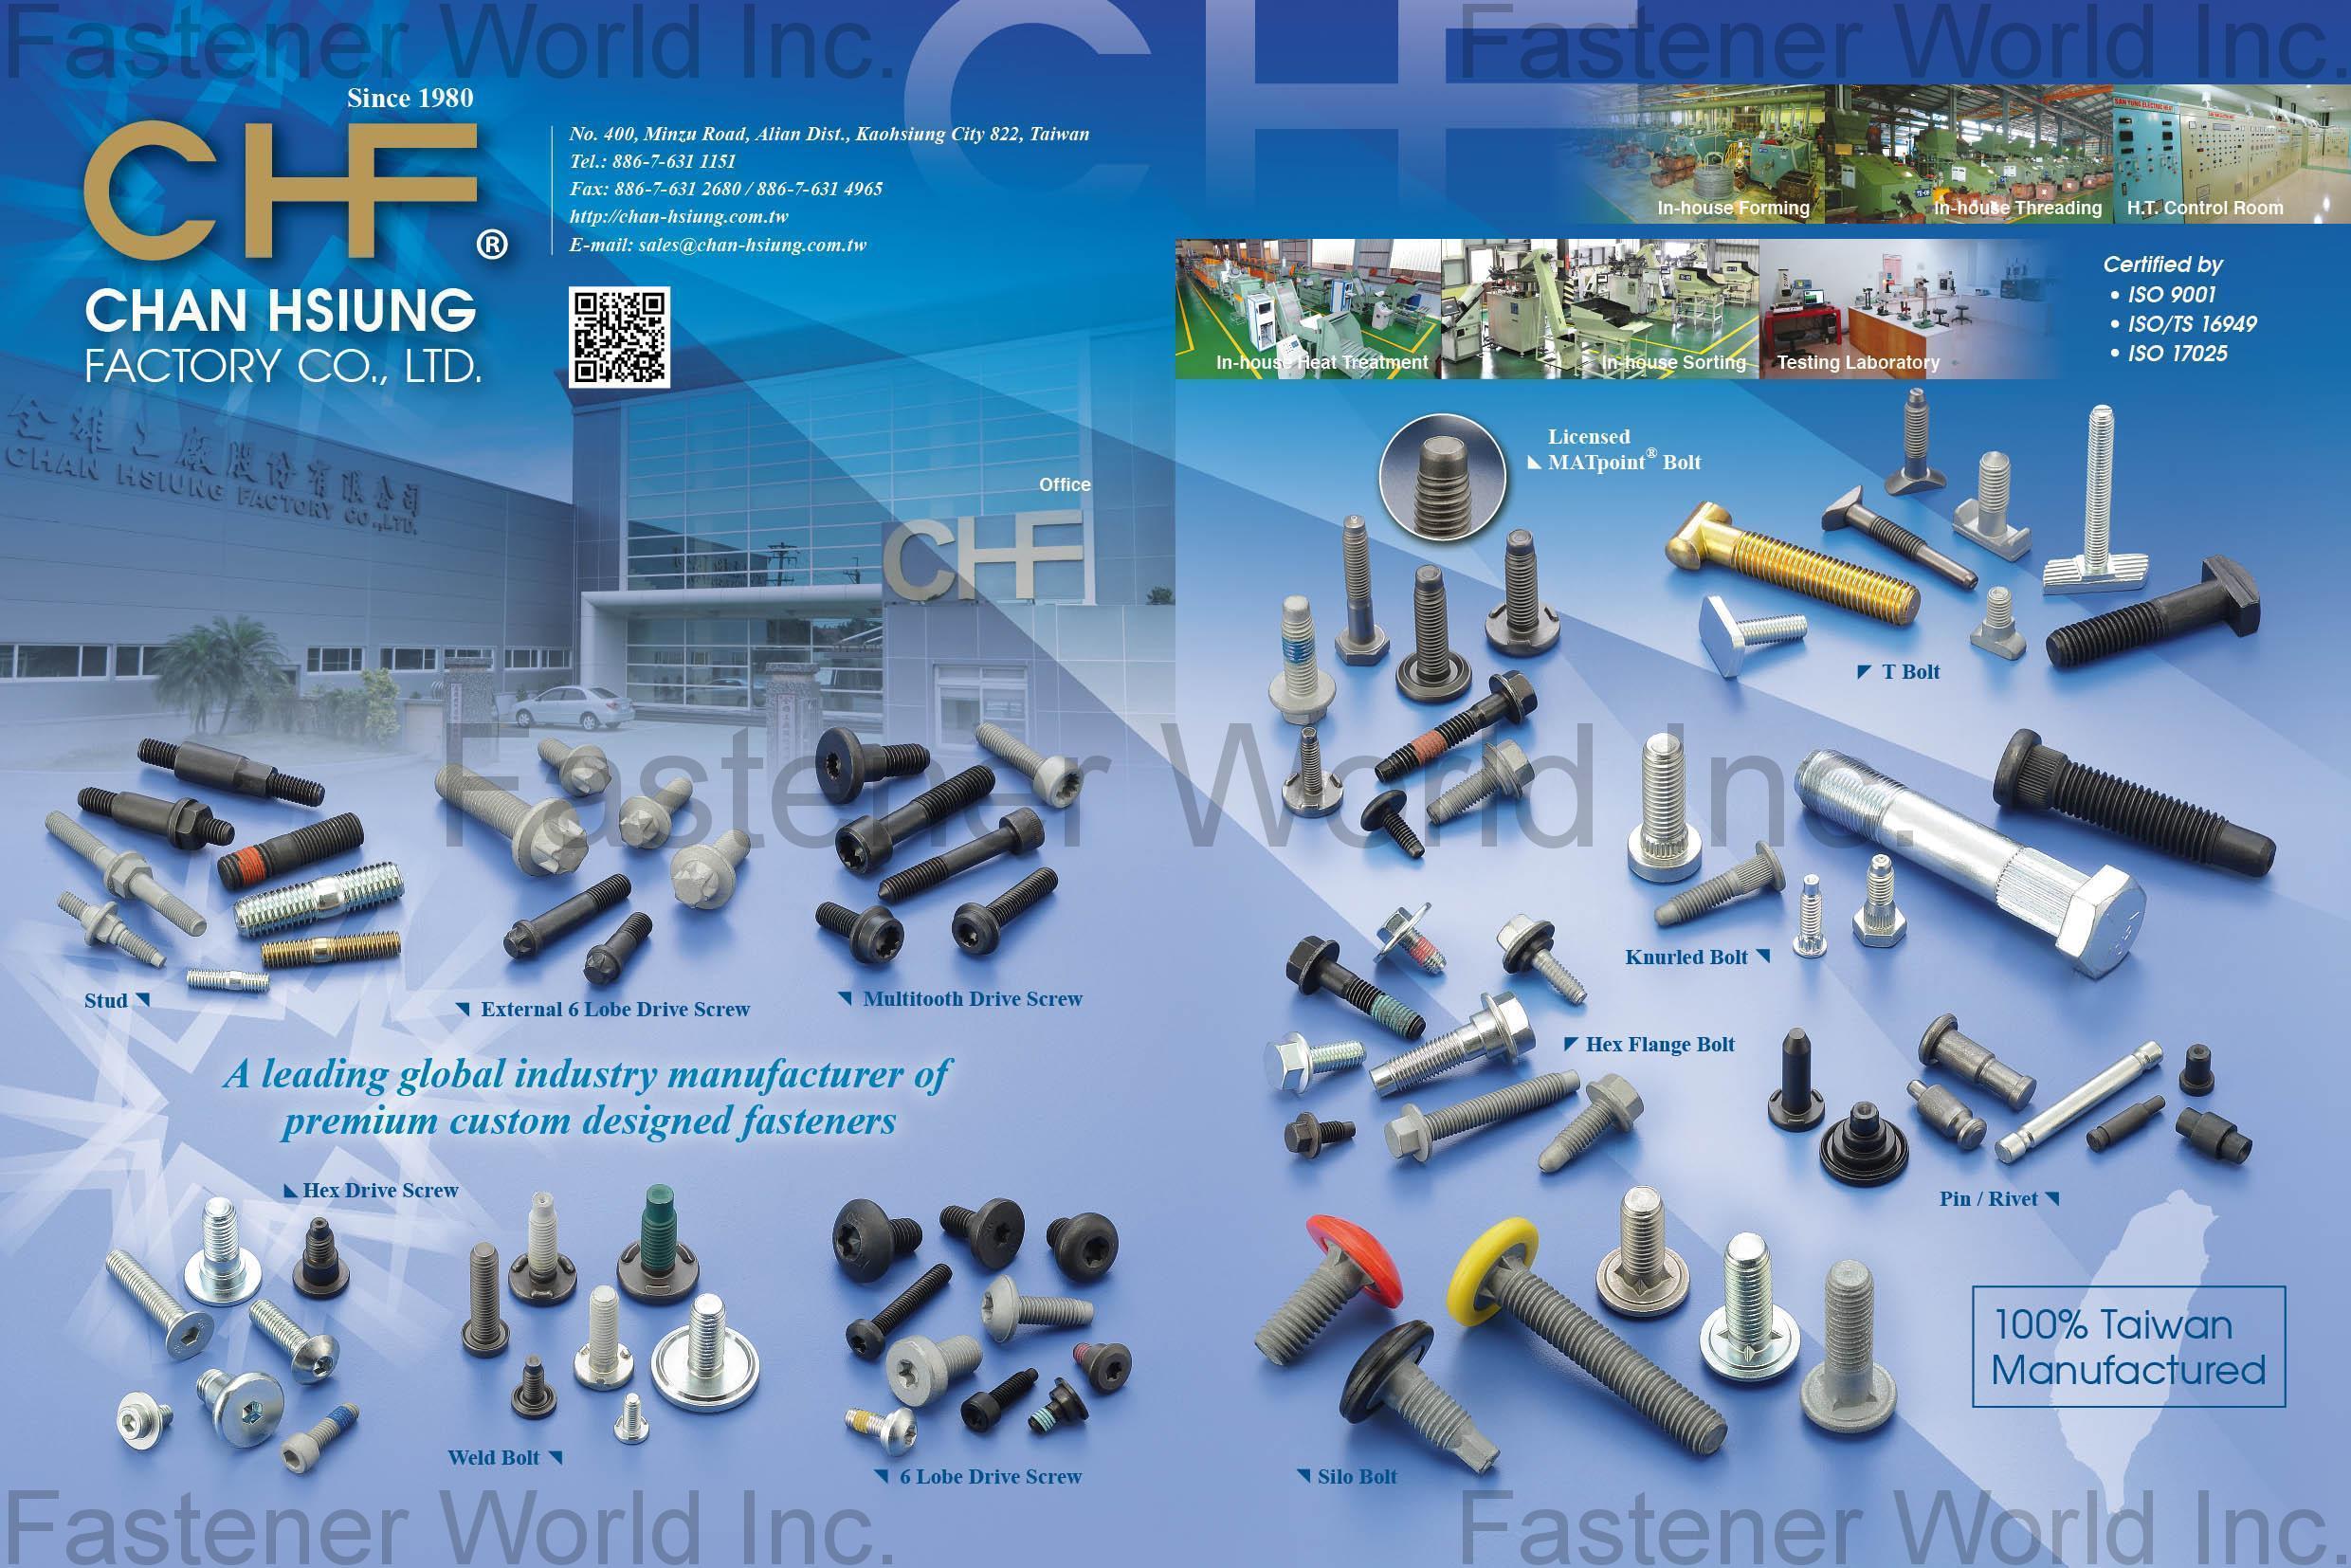 CHAN HSIUNG FACTORY CO., LTD.  , Stud, External 6-Lobe Flange Bolt, Multitooth Driver Screw, Hex Driver Screw, Weld Bolt, 6-Lobe Driver Screw, Licensed MATpoint Bolt, T-Head Bolt, Knurled Bolt, Flange Bolt, Pin / Rivet, Silo Bolt , T-head Or T-slot Bolts